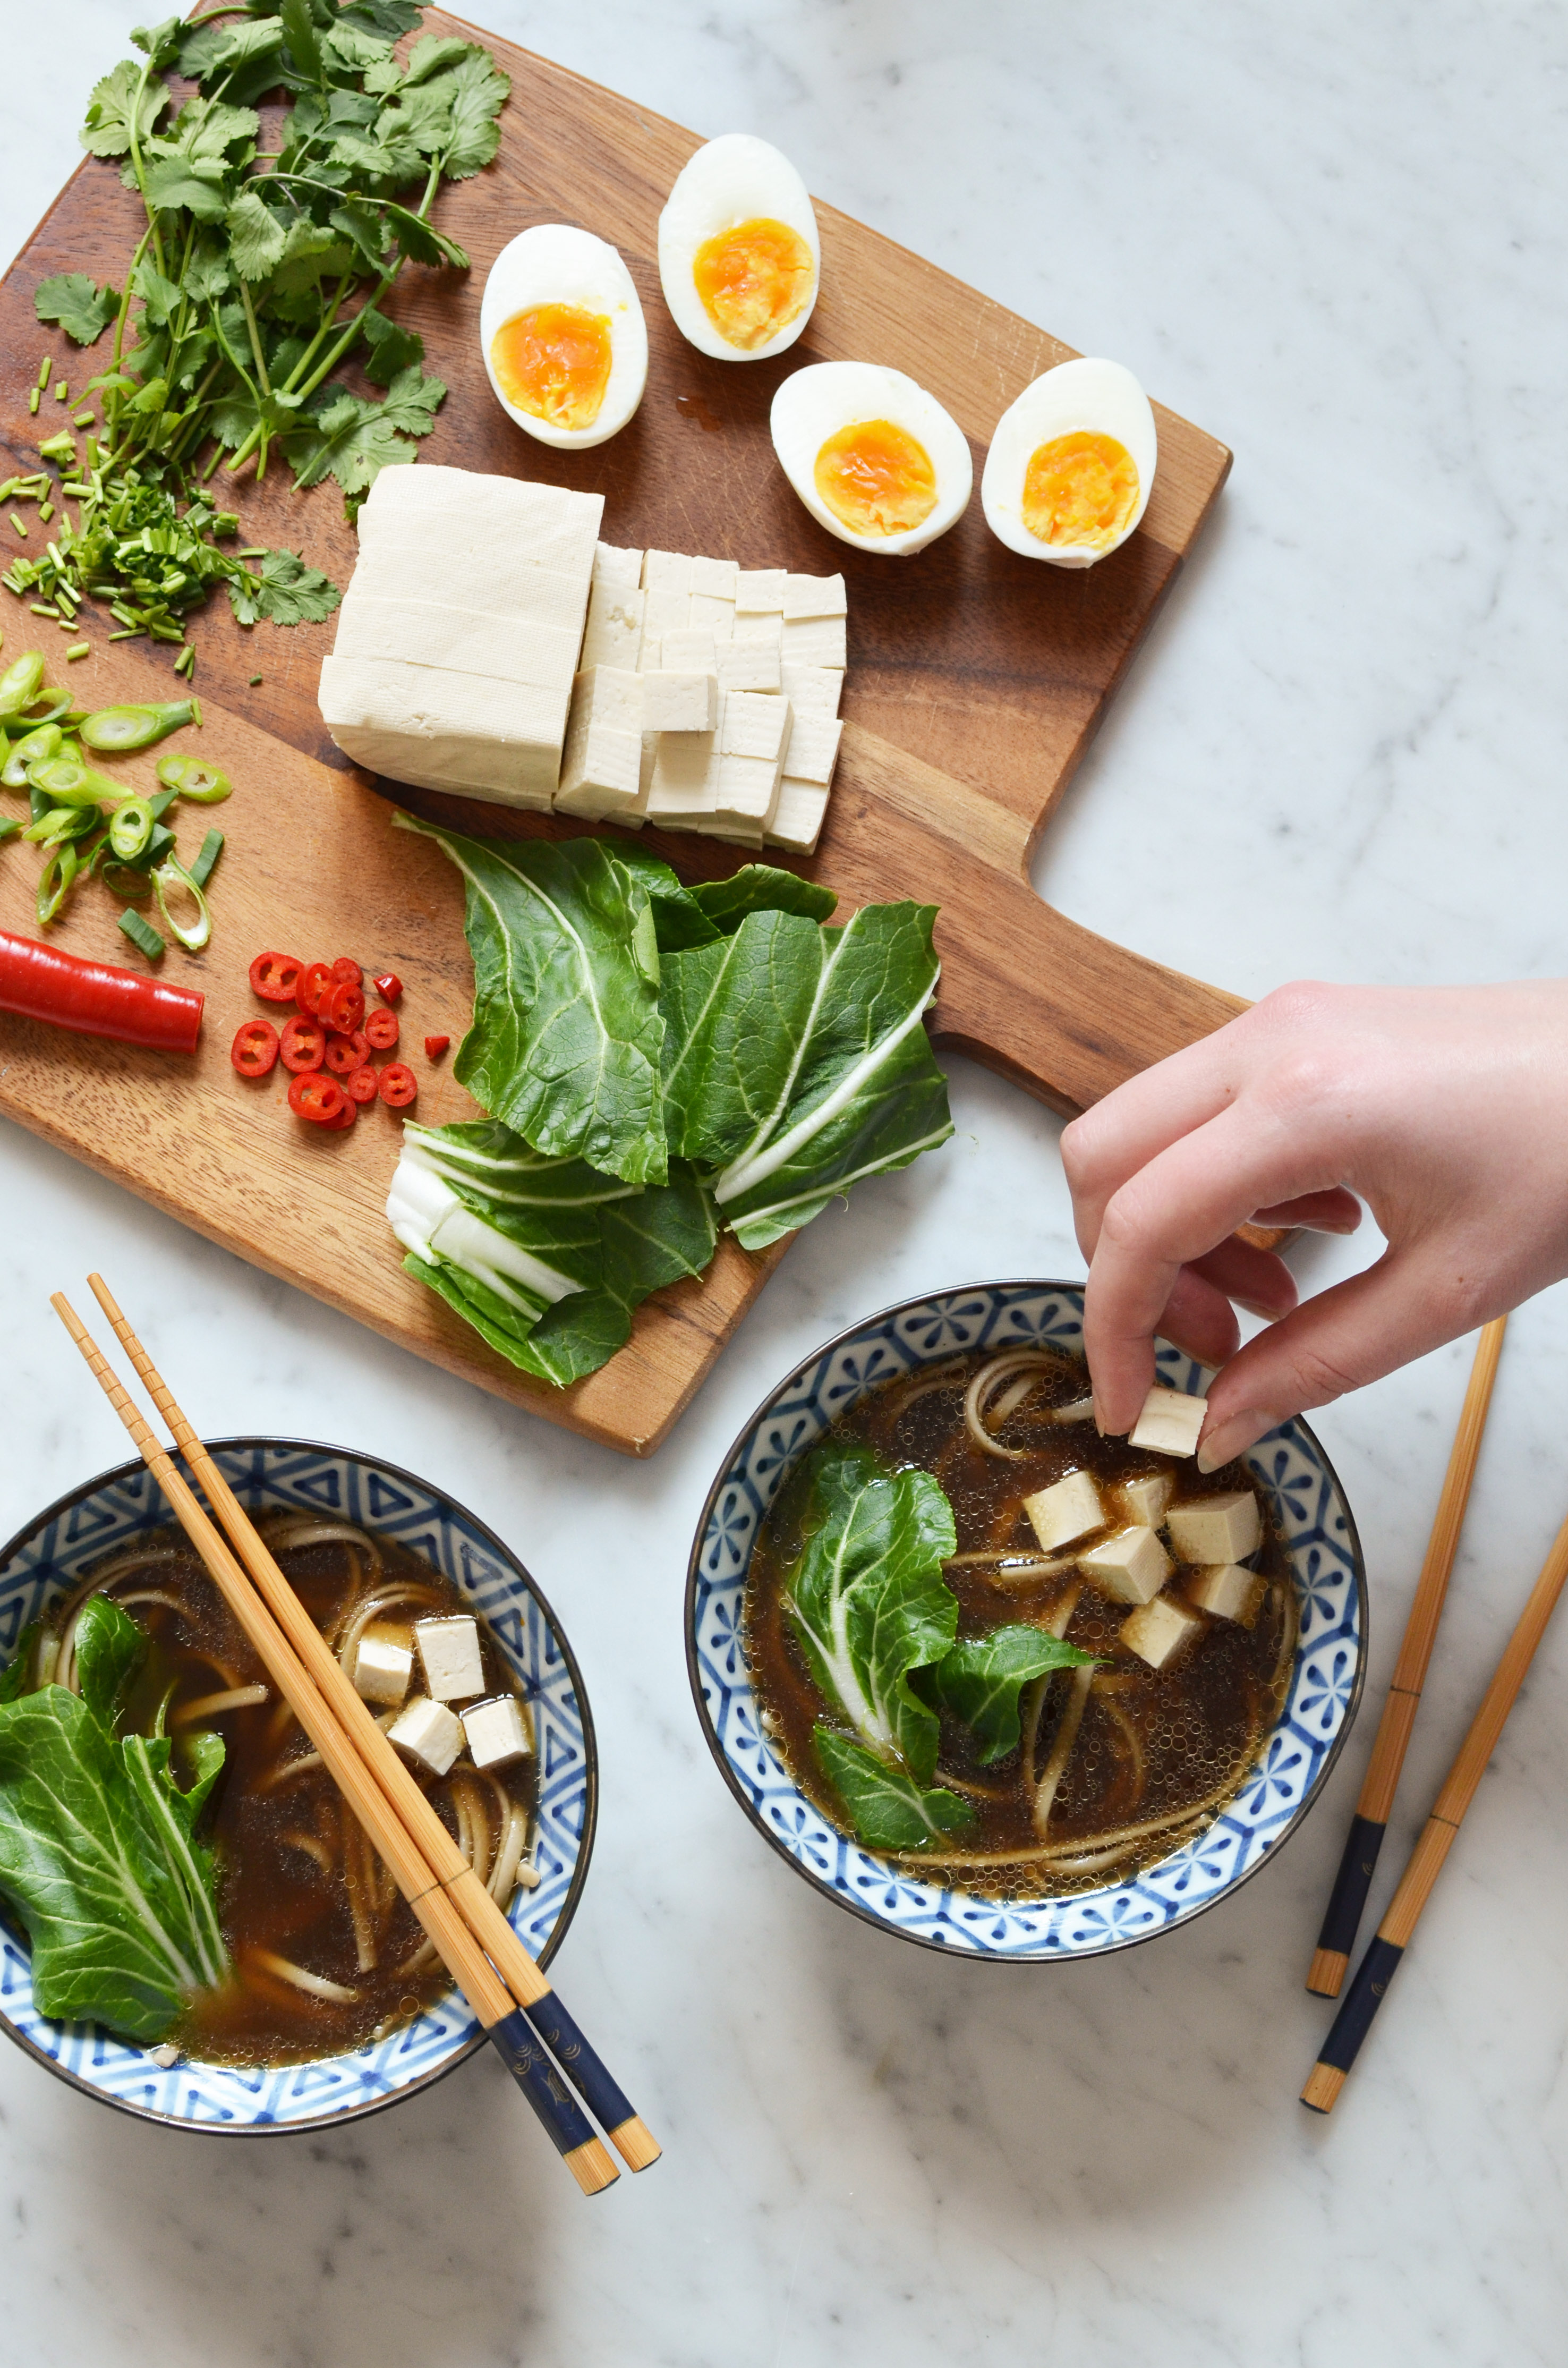 Recipe for spicy homemade ramen broth with all the toppings, including tofu, soft boiled eggs, fresh cilantro, red chili peppers, green onion, bok choy and buckwheat noodles. Gluten free!